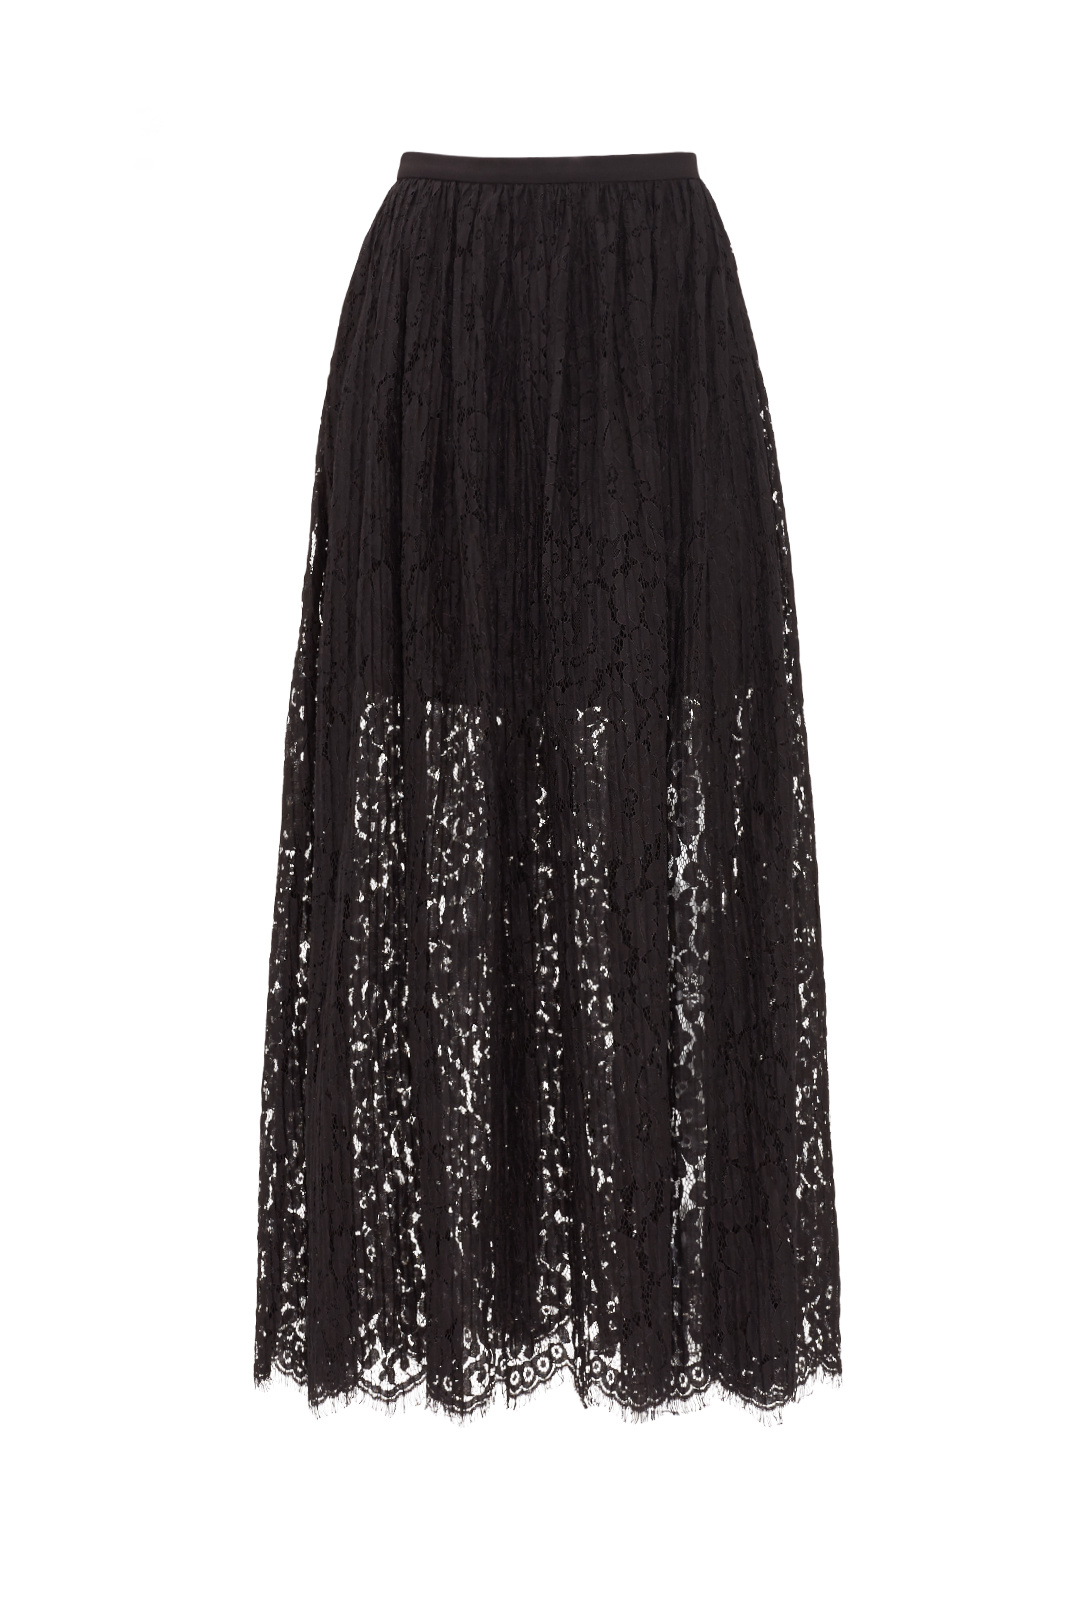 stand still black lace skirt by keepsake for $50 | rent the runway SBXCDNH